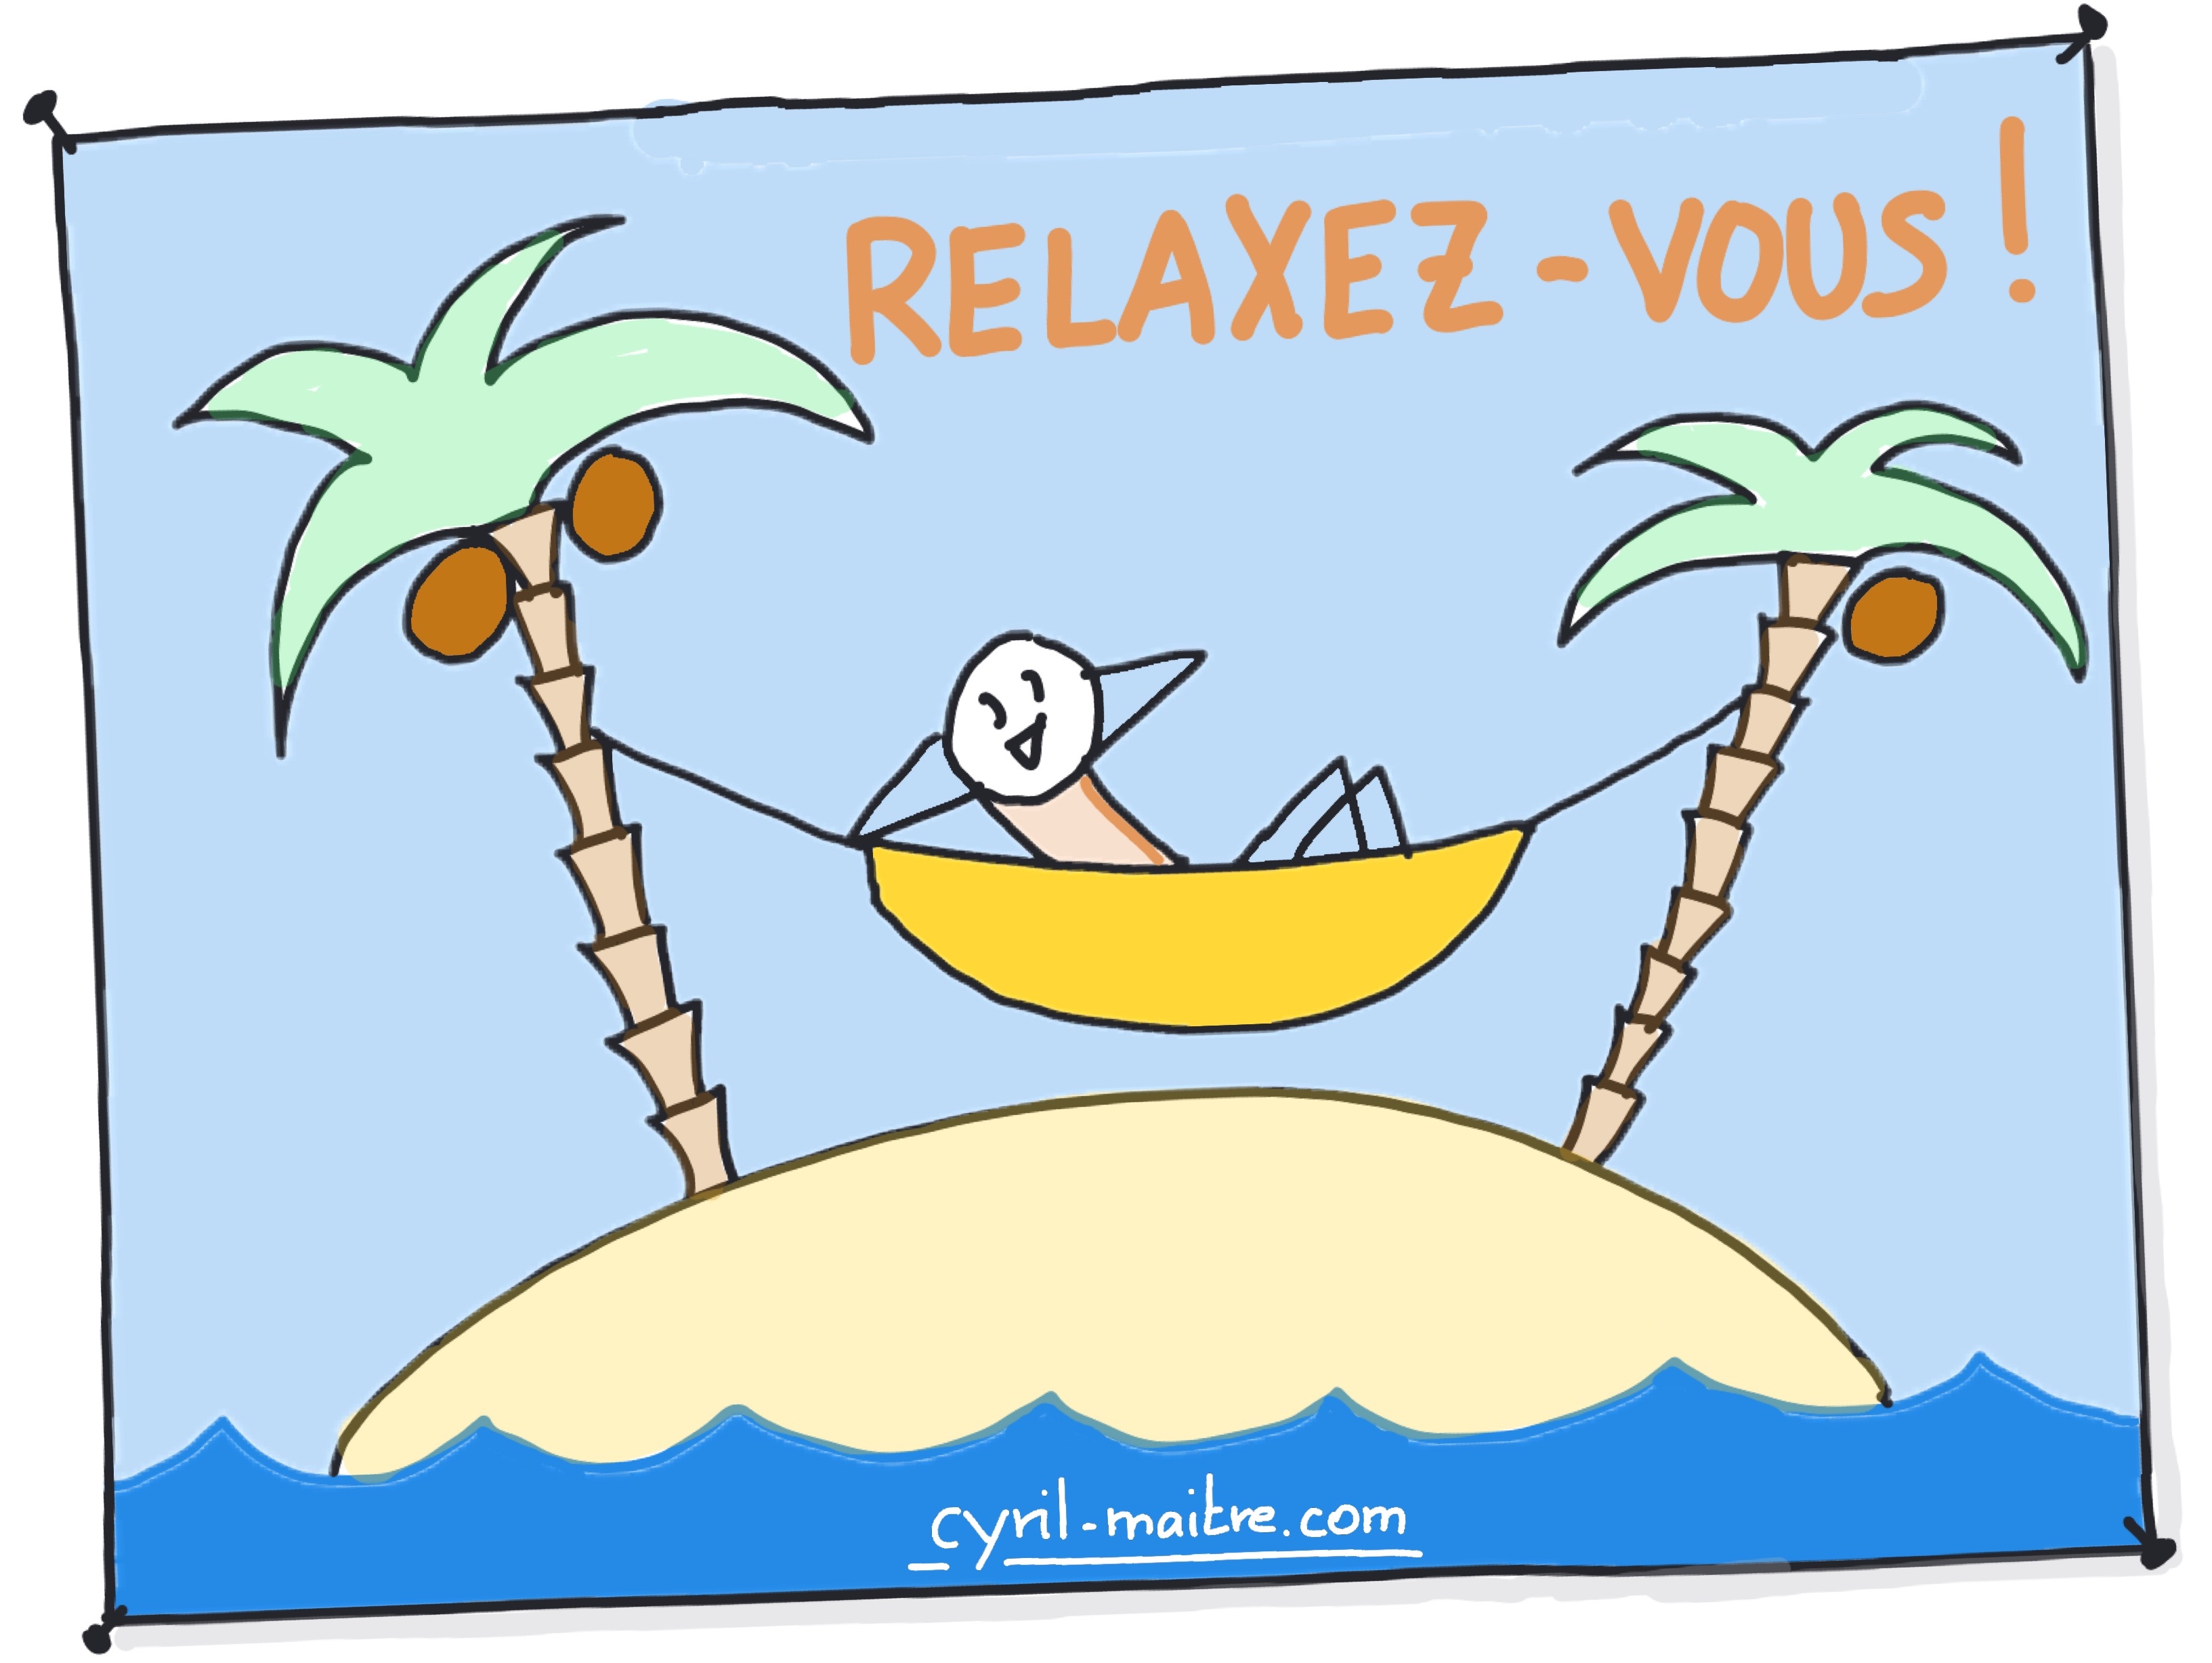 Relaxez-vous